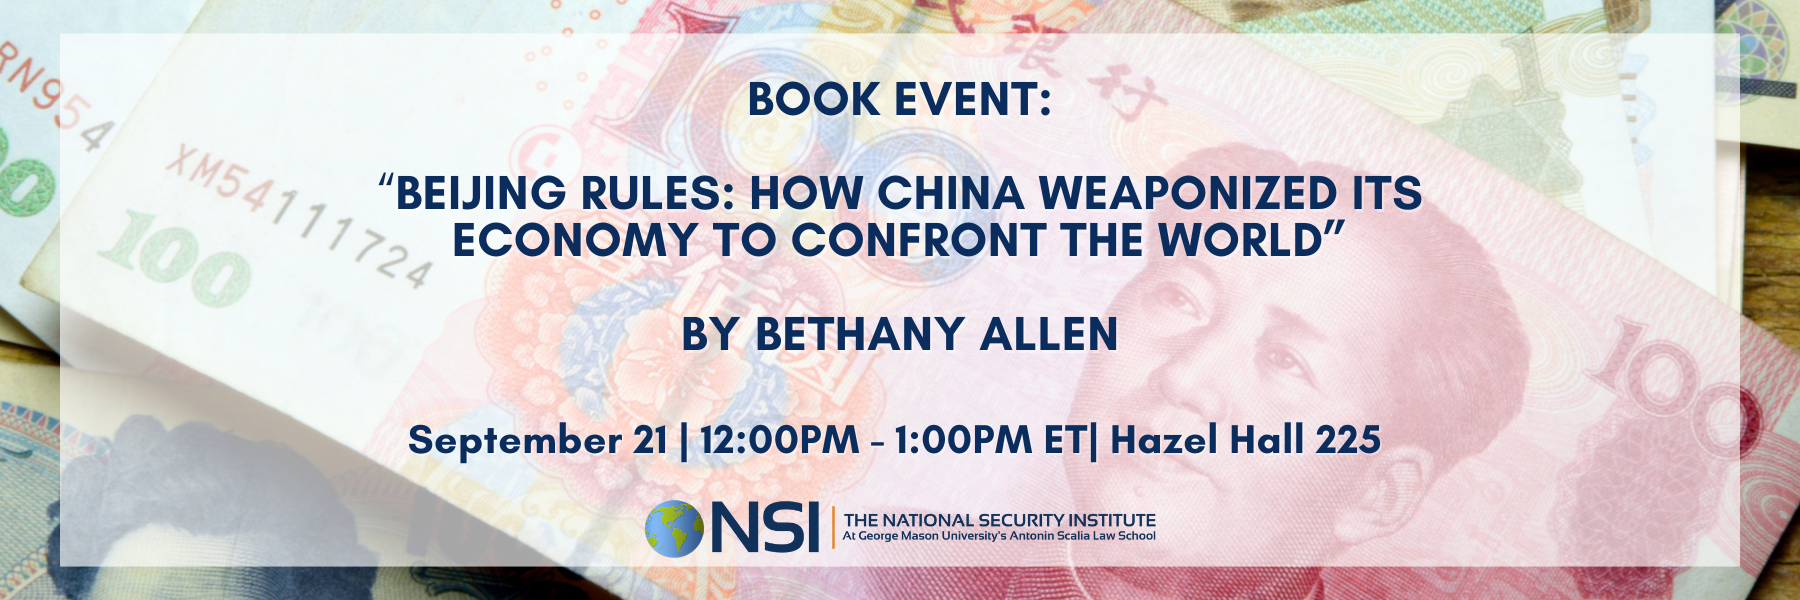 Book Event: Beijing Rules: How China Weaponized Its Economy to Confront the World